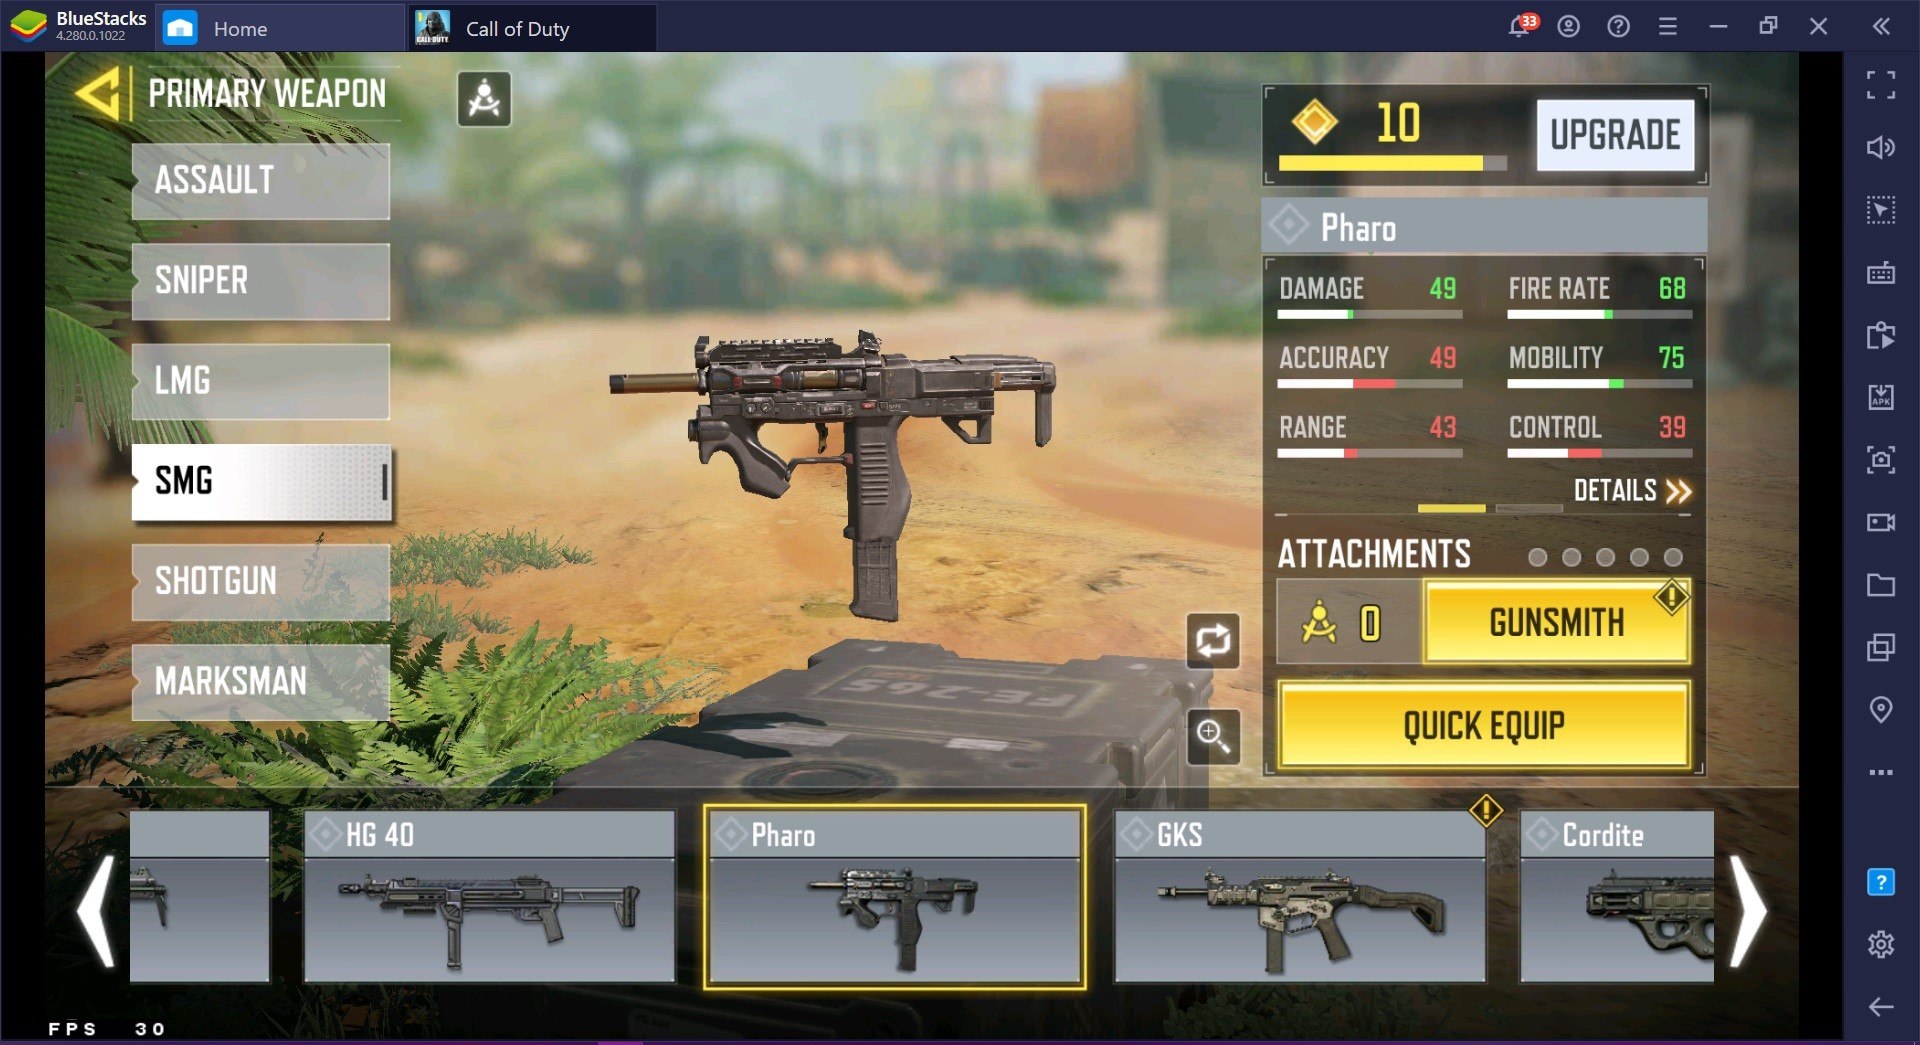 Call of Duty: Mobile Season 3 SMG Gun Guide For Multiplayer Ranked Games